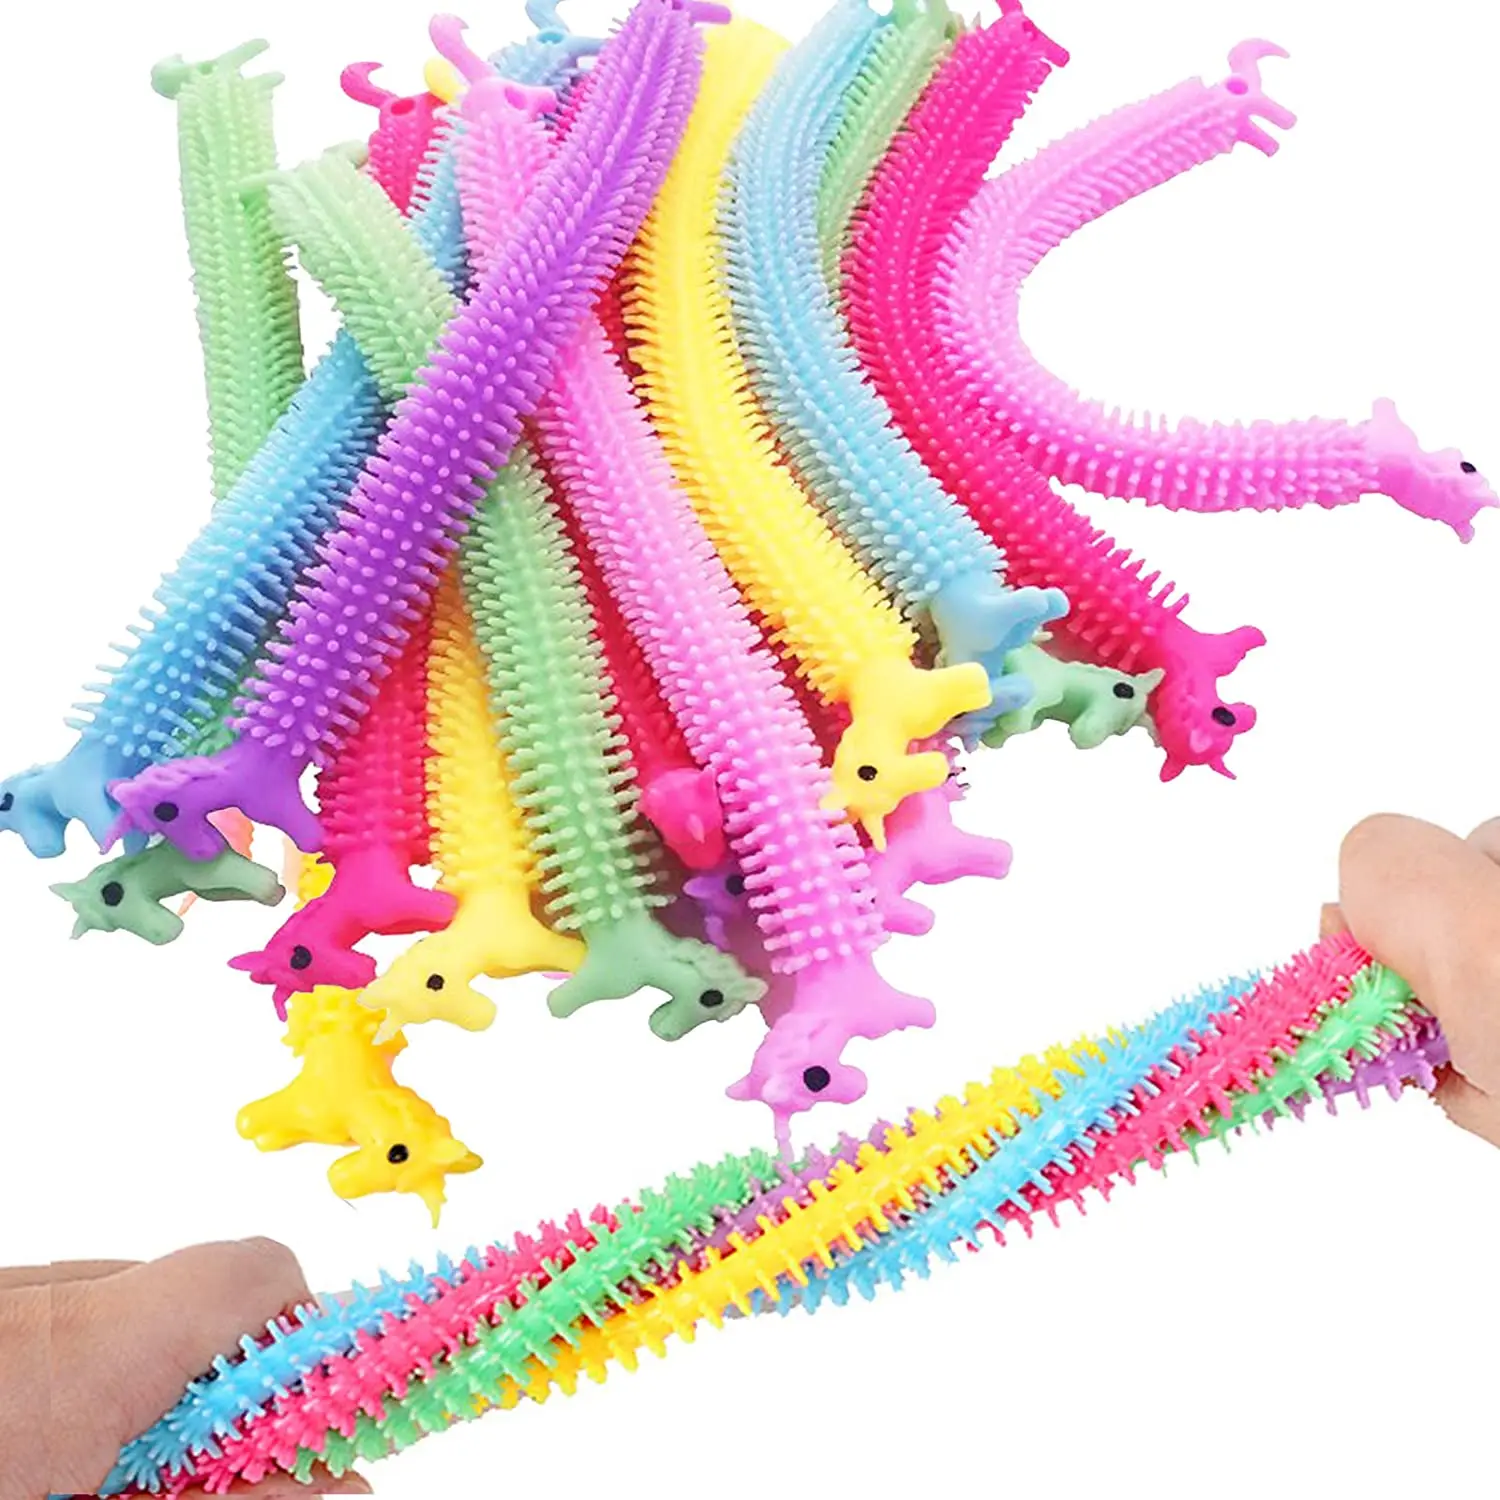 

Unicorn Stretchy String Fidget Toys, Therapy Sensory Toys Anxiety Squeeze Monkey Noodles for Kids and Adults with ADD ADHD 2021